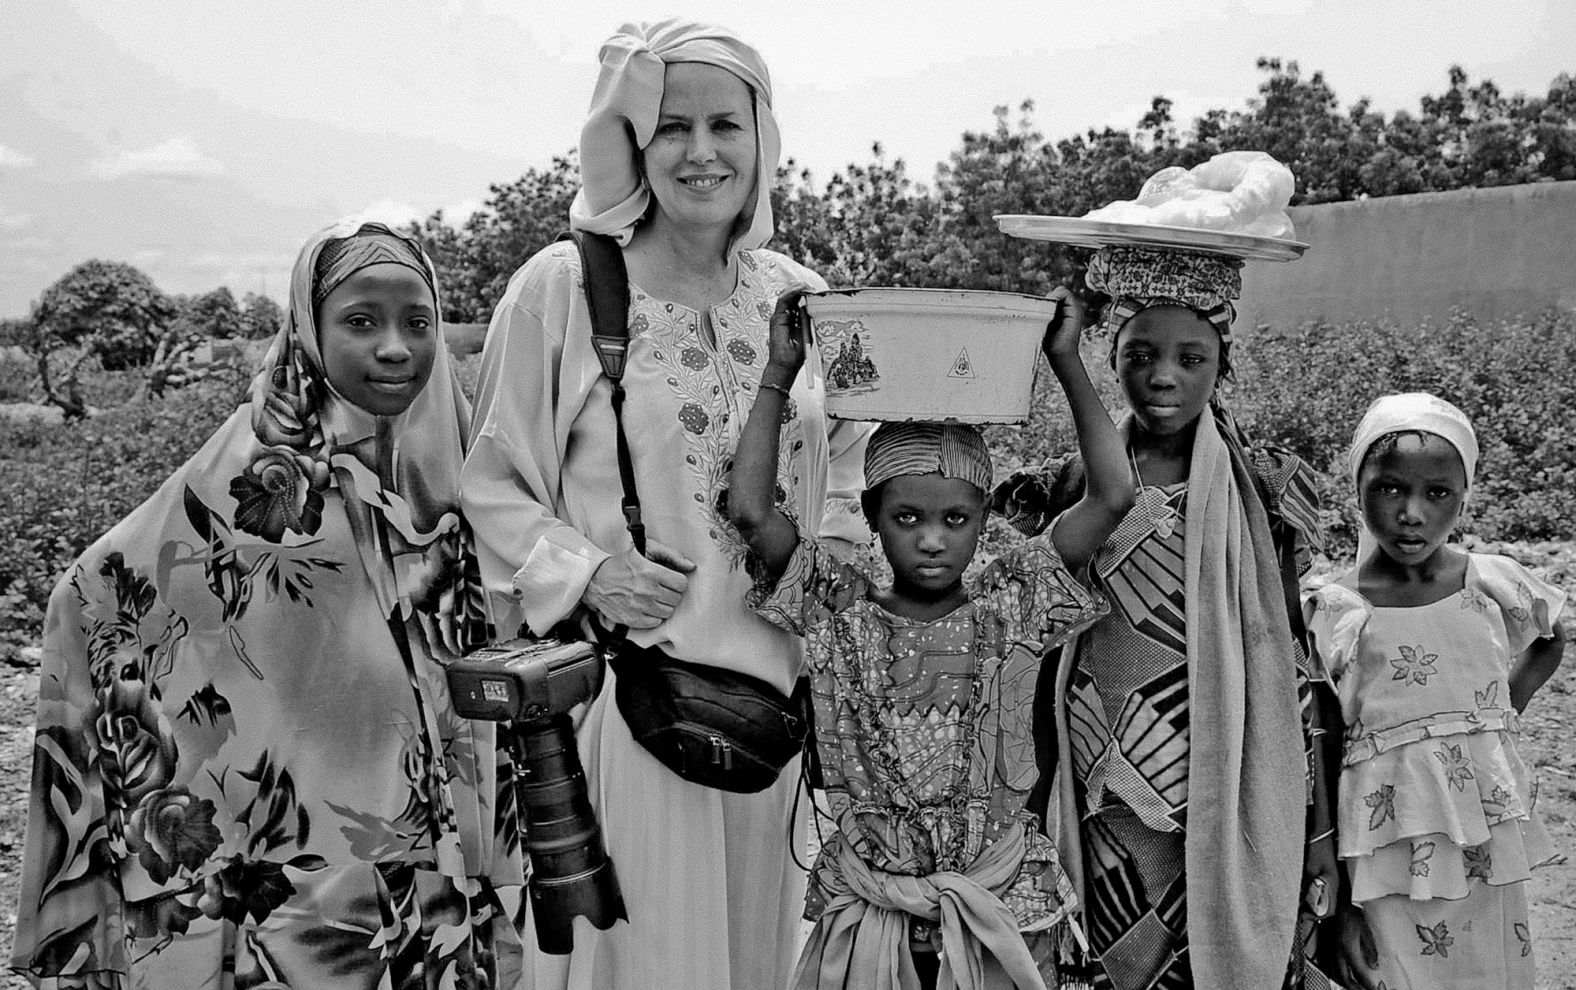 <a href="http://maryfcalvert.com/" target="_blank" target="_blank">Mary F. Calvert</a> works on a story about polio while in Nigeria in 2010. "I specialize in underreported and neglected human-rights issues and actively seek out projects about our society's most marginalized and forgotten people," she said. One of her recent projects, <a href="https://www.nytimes.com/interactive/2019/09/10/us/men-military-sexual-assault.html" target="_blank" target="_blank">featured by The New York Times</a>, profiles men who have been sexually assaulted while serving in the US military. She has received several honors for this series, including the Canon Female Photojournalist Award.